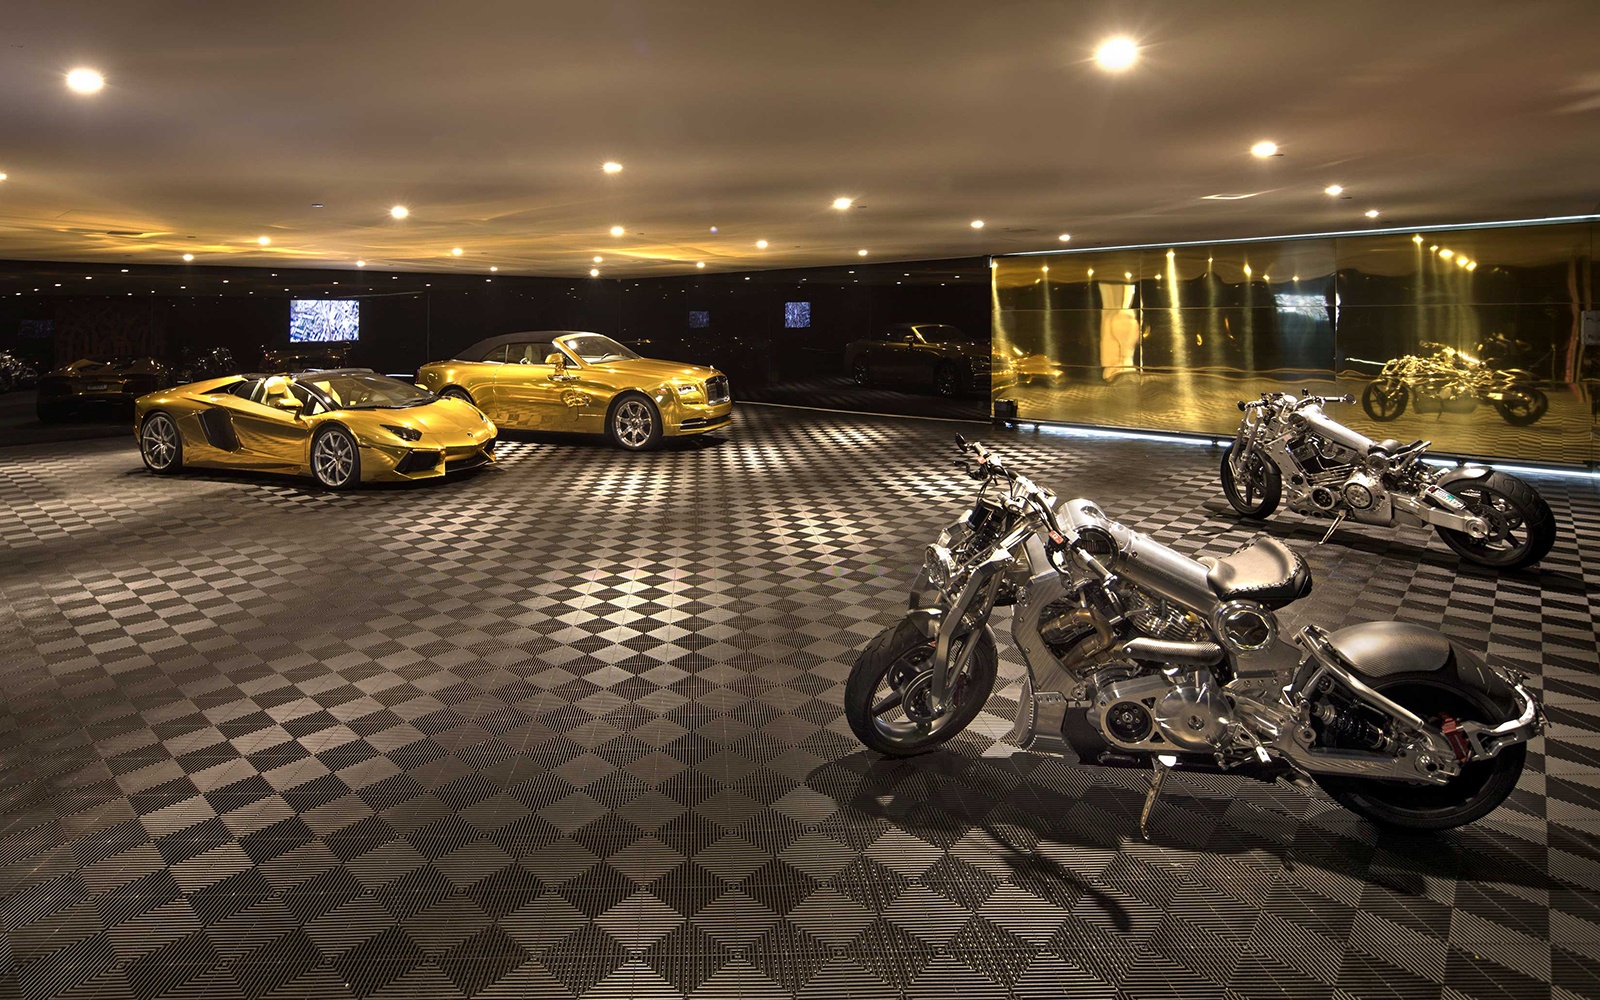 Billionaire Row dream house Opus has everything for the luxury collector, including its very own car museum.